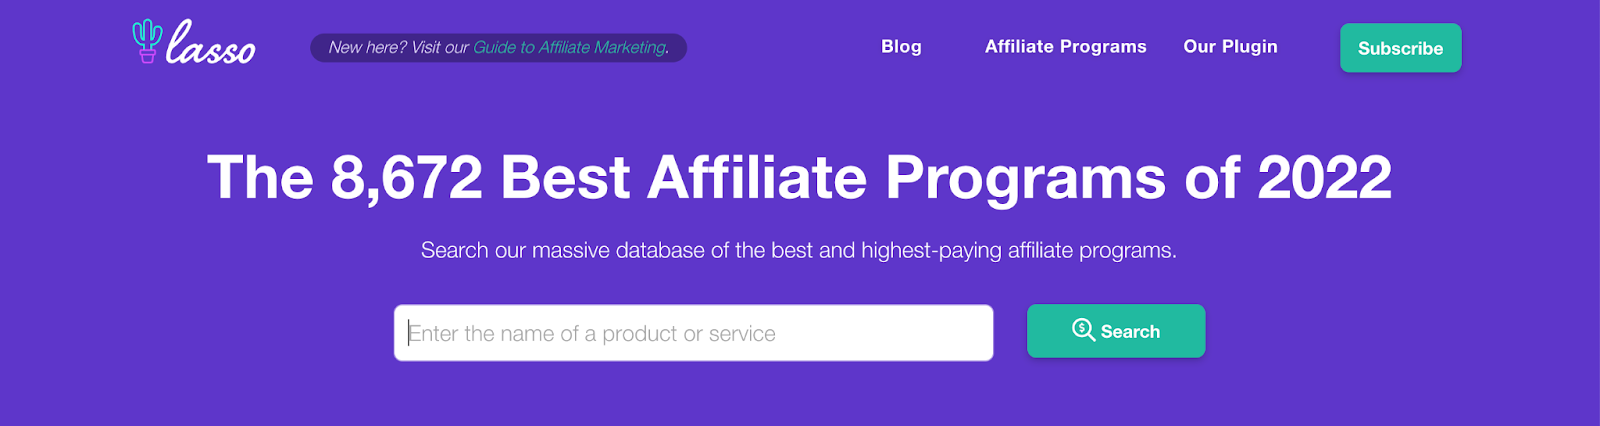 lasso affiliate program database search page